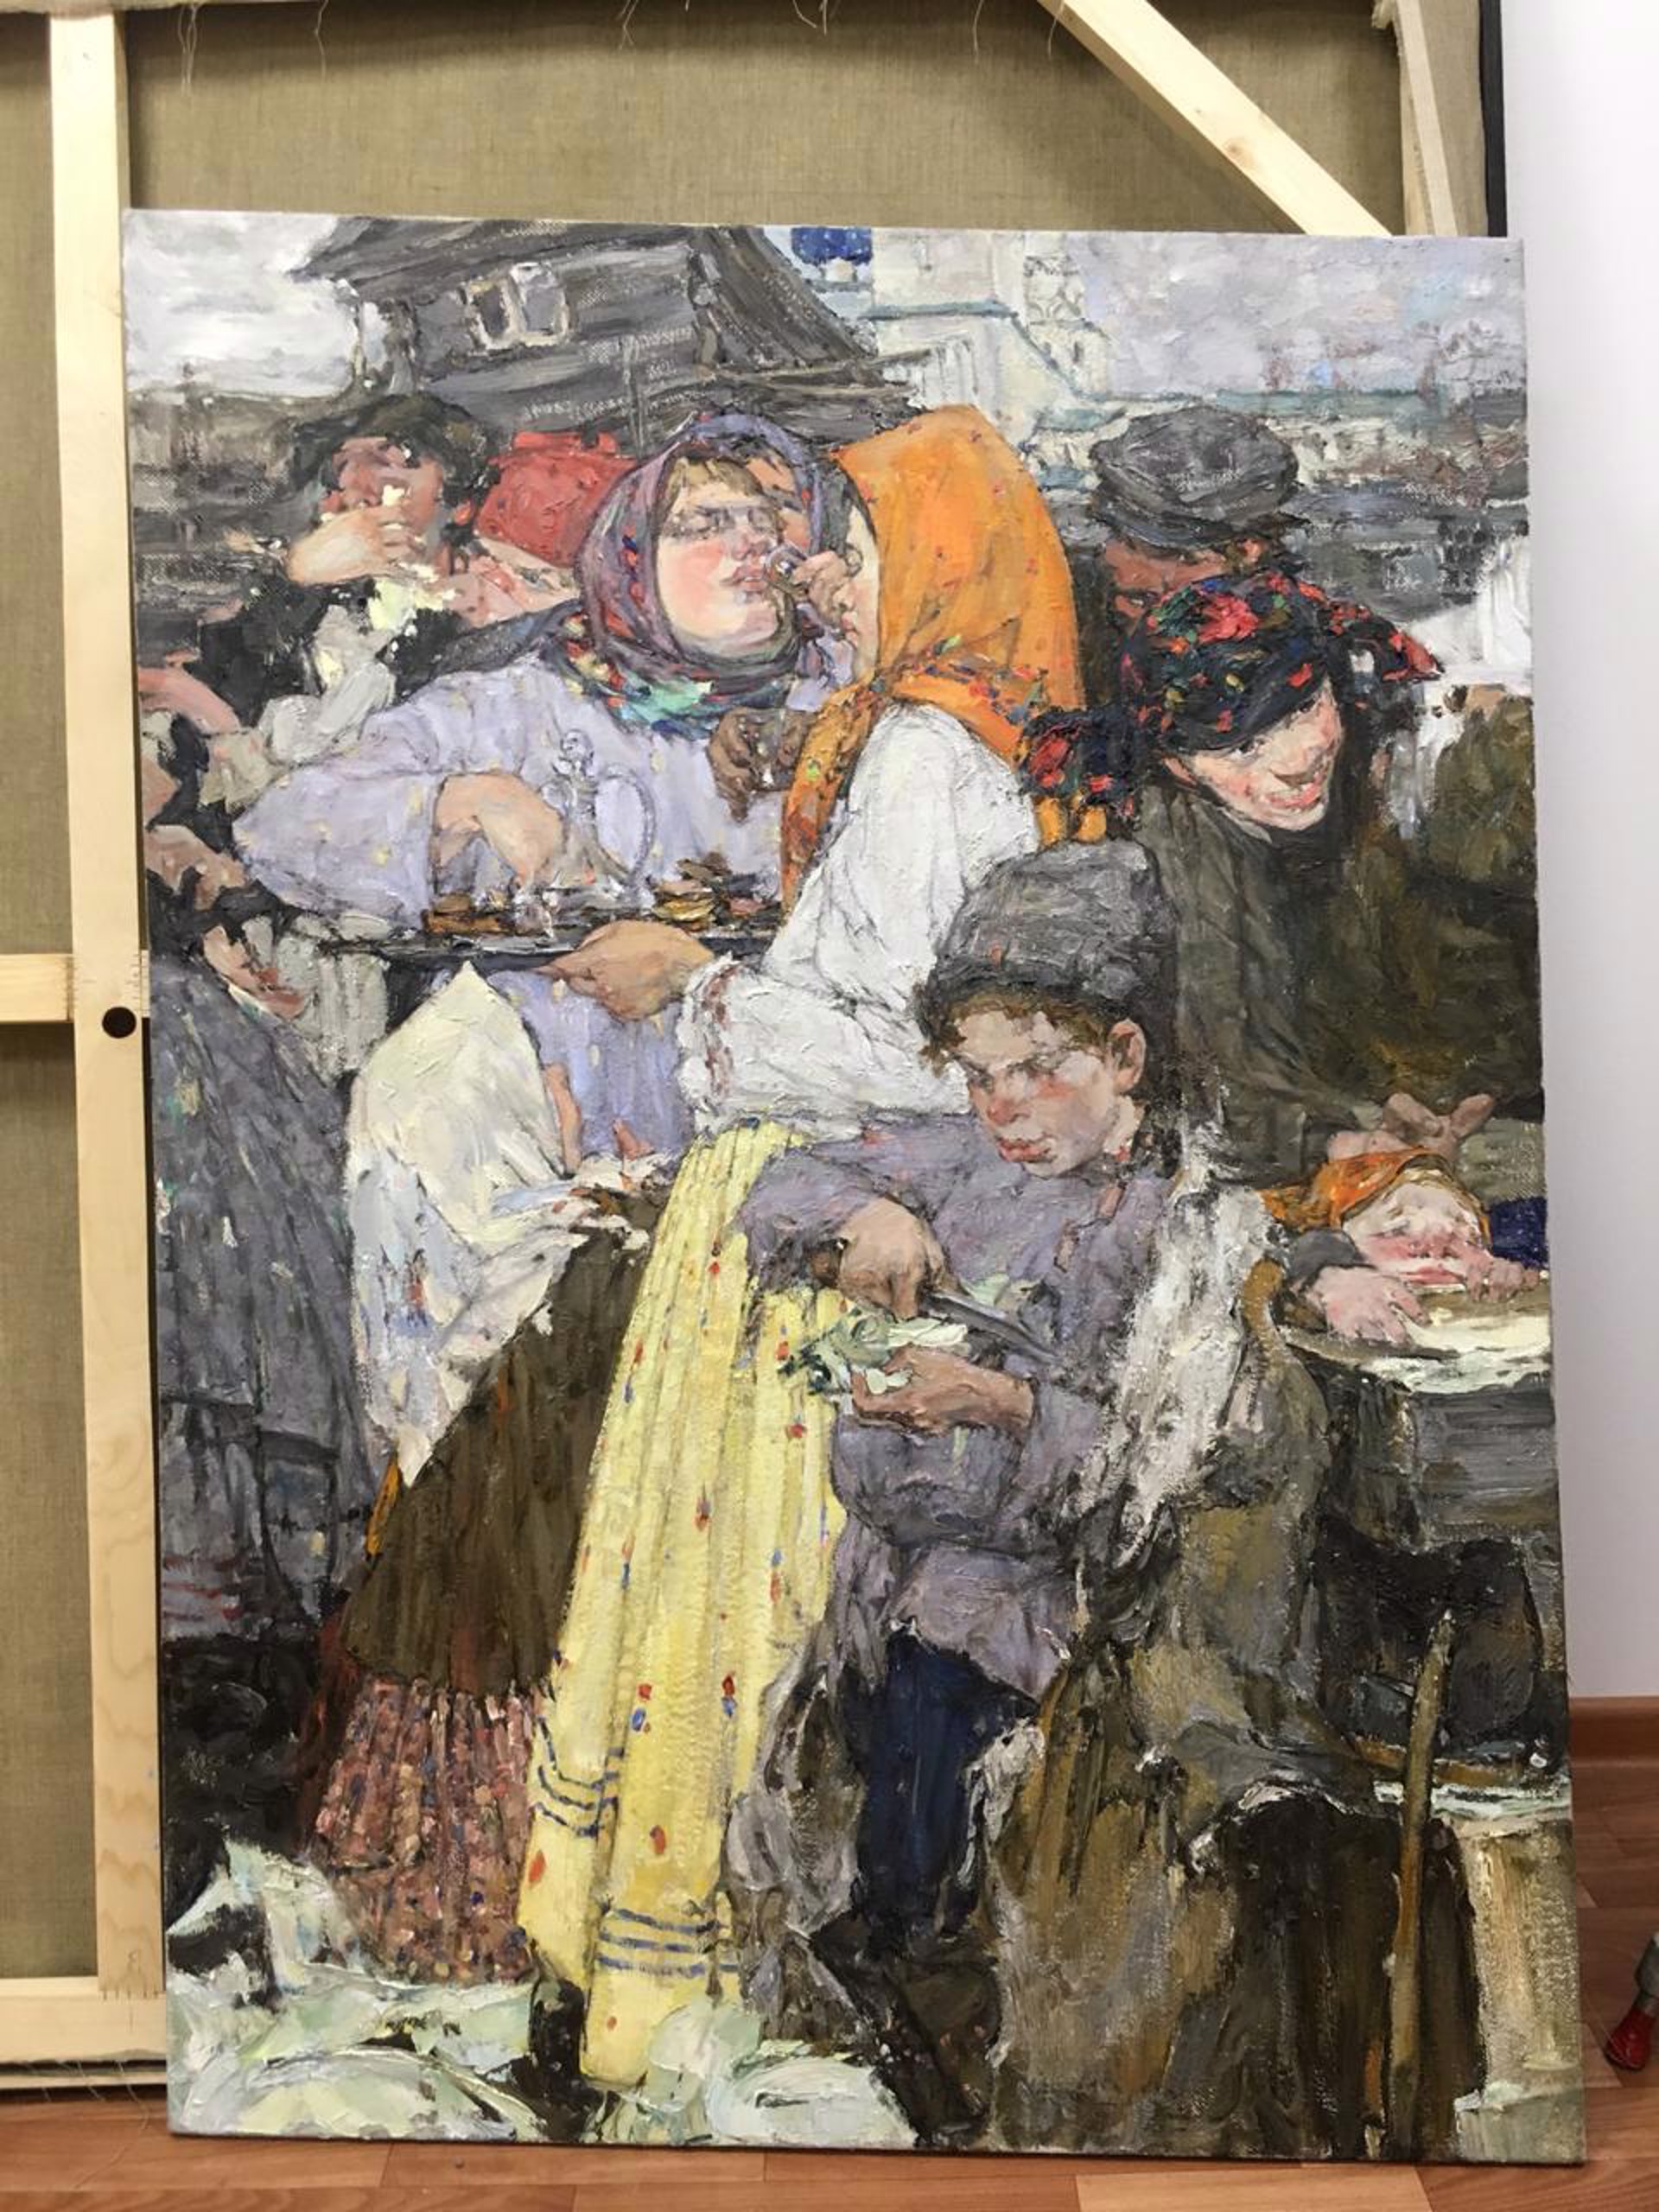 Fragment Copy of "Gathering of the Cabbage Crop" by Nicolai Fechin" by Andrey Erofeev